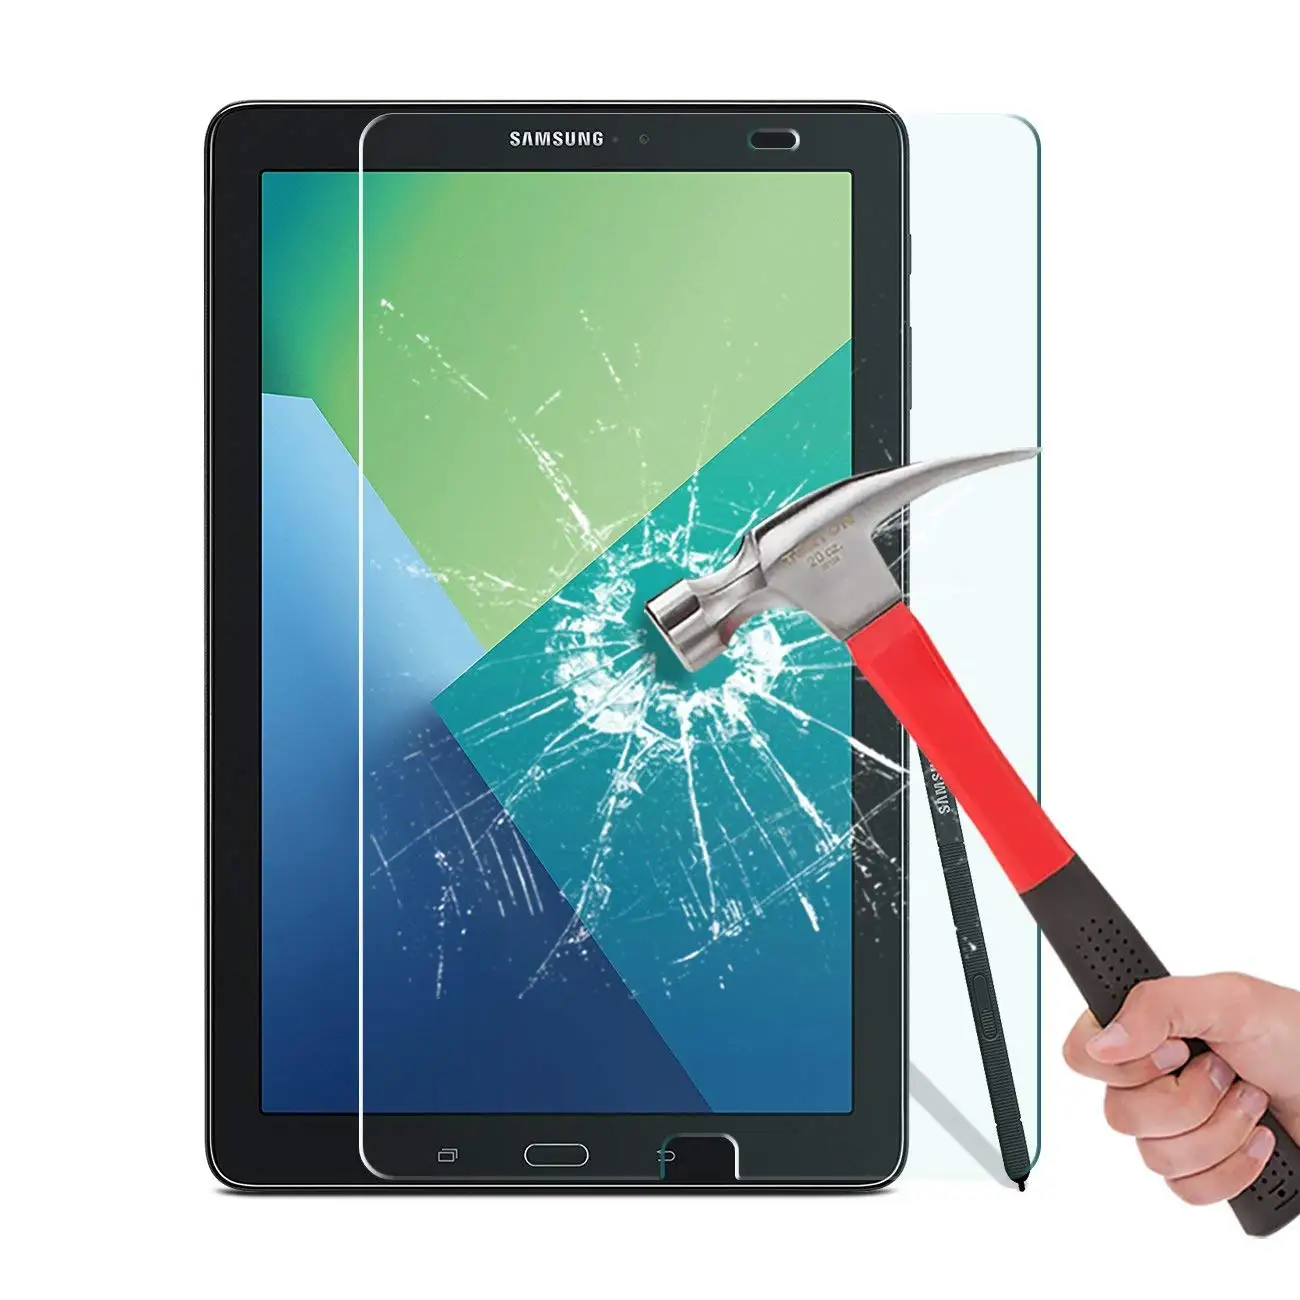 

Tempered Glass Screen Protector Film for Samsung Galaxy Tab 4 3 2 8.0 T330 10.1 T530 7.0 T230 P5200 T310 T210 P5100 Lite T110, Transparency 99% color